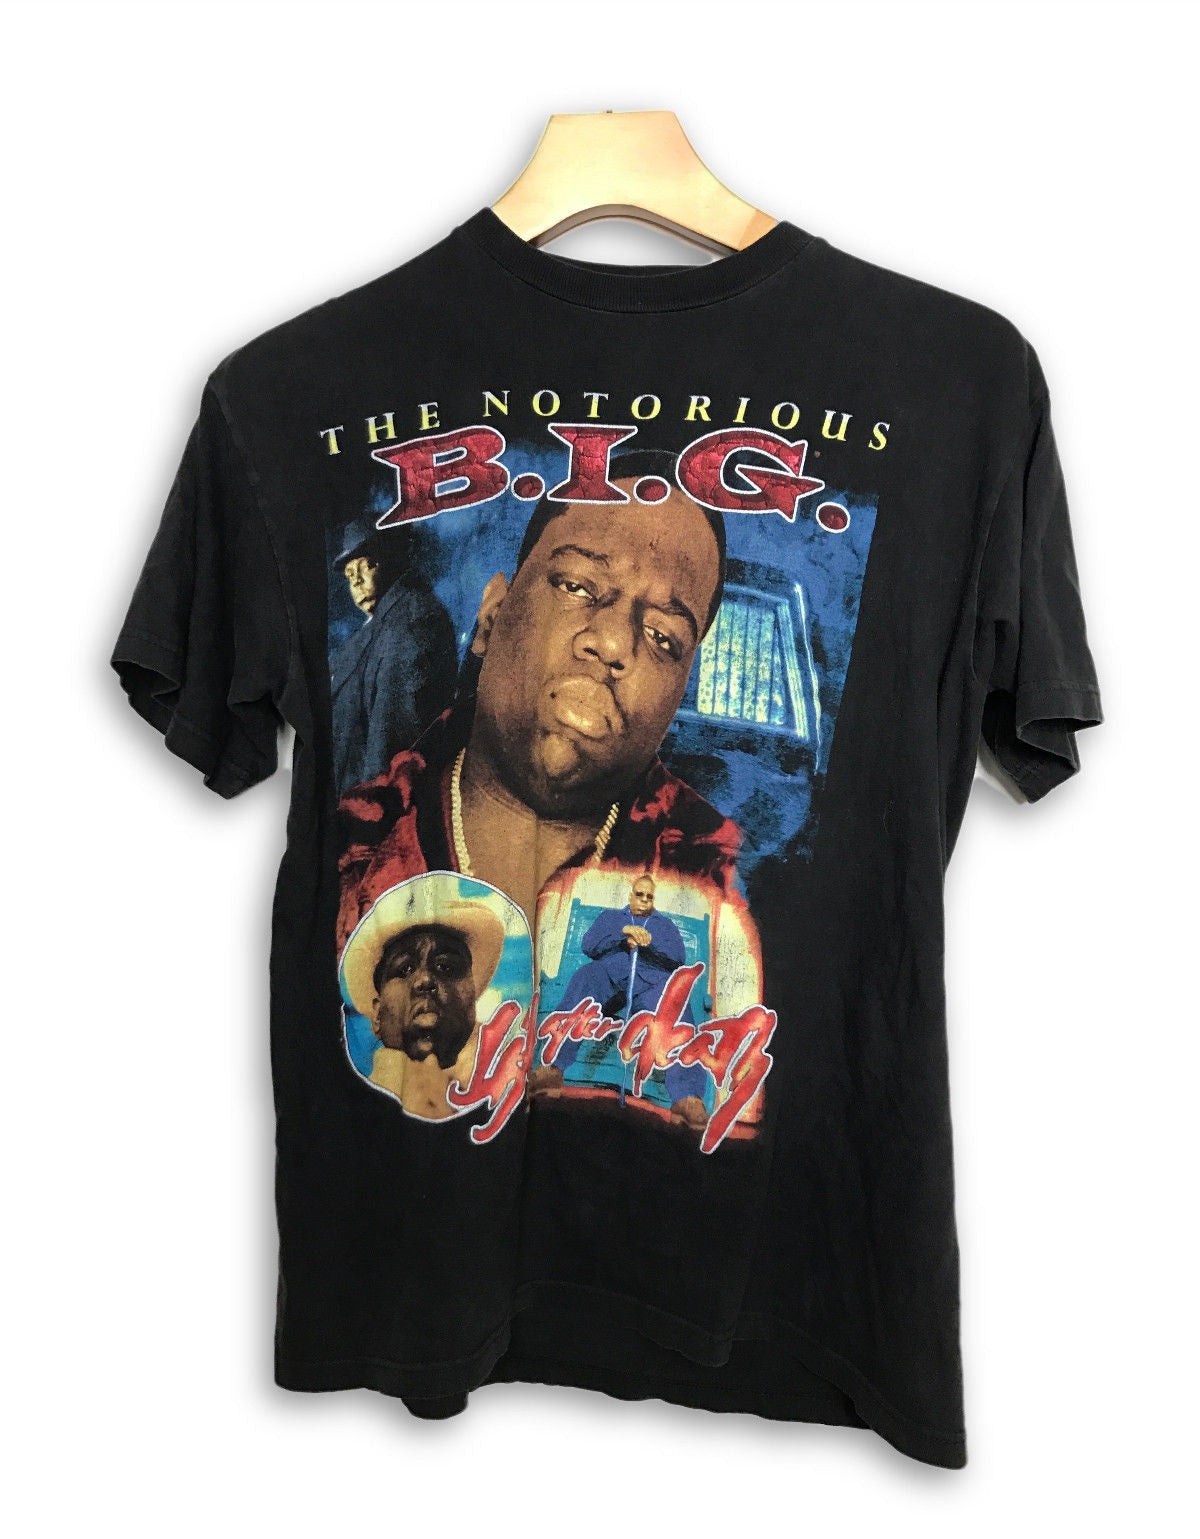 Biggie Smalls Vintage Outfit - How to Dress Like Notorious B.I.G.